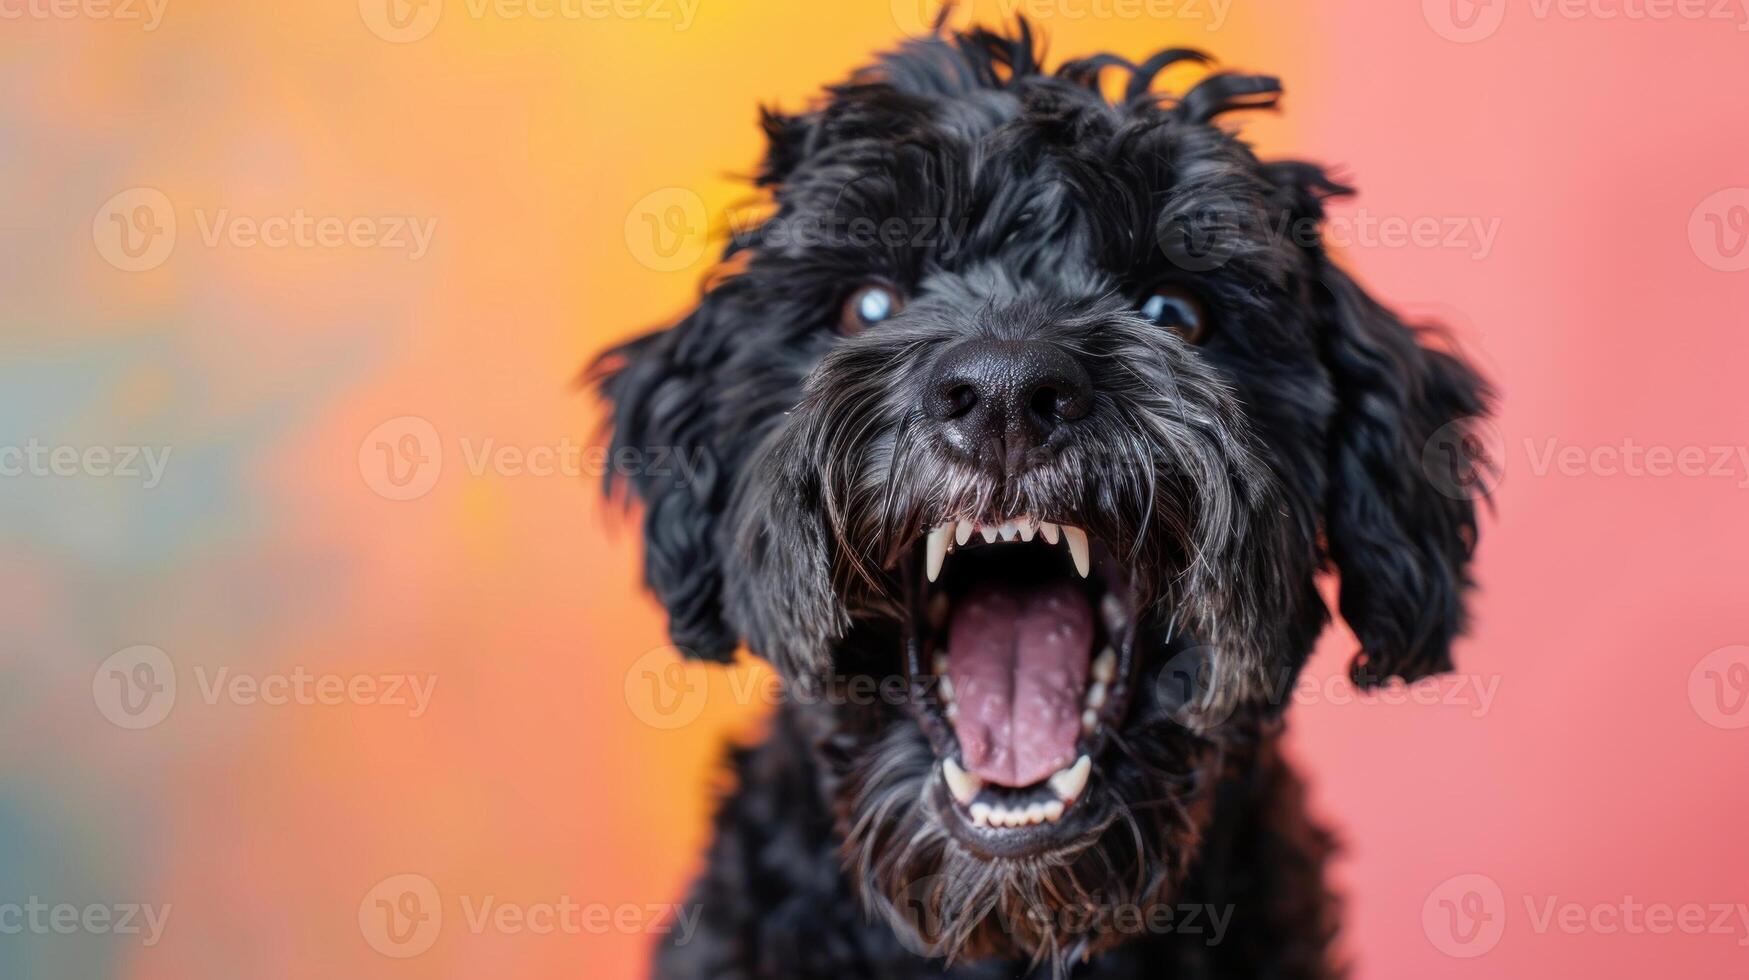 Black Russian Terrier, angry dog baring its teeth, studio lighting pastel background photo